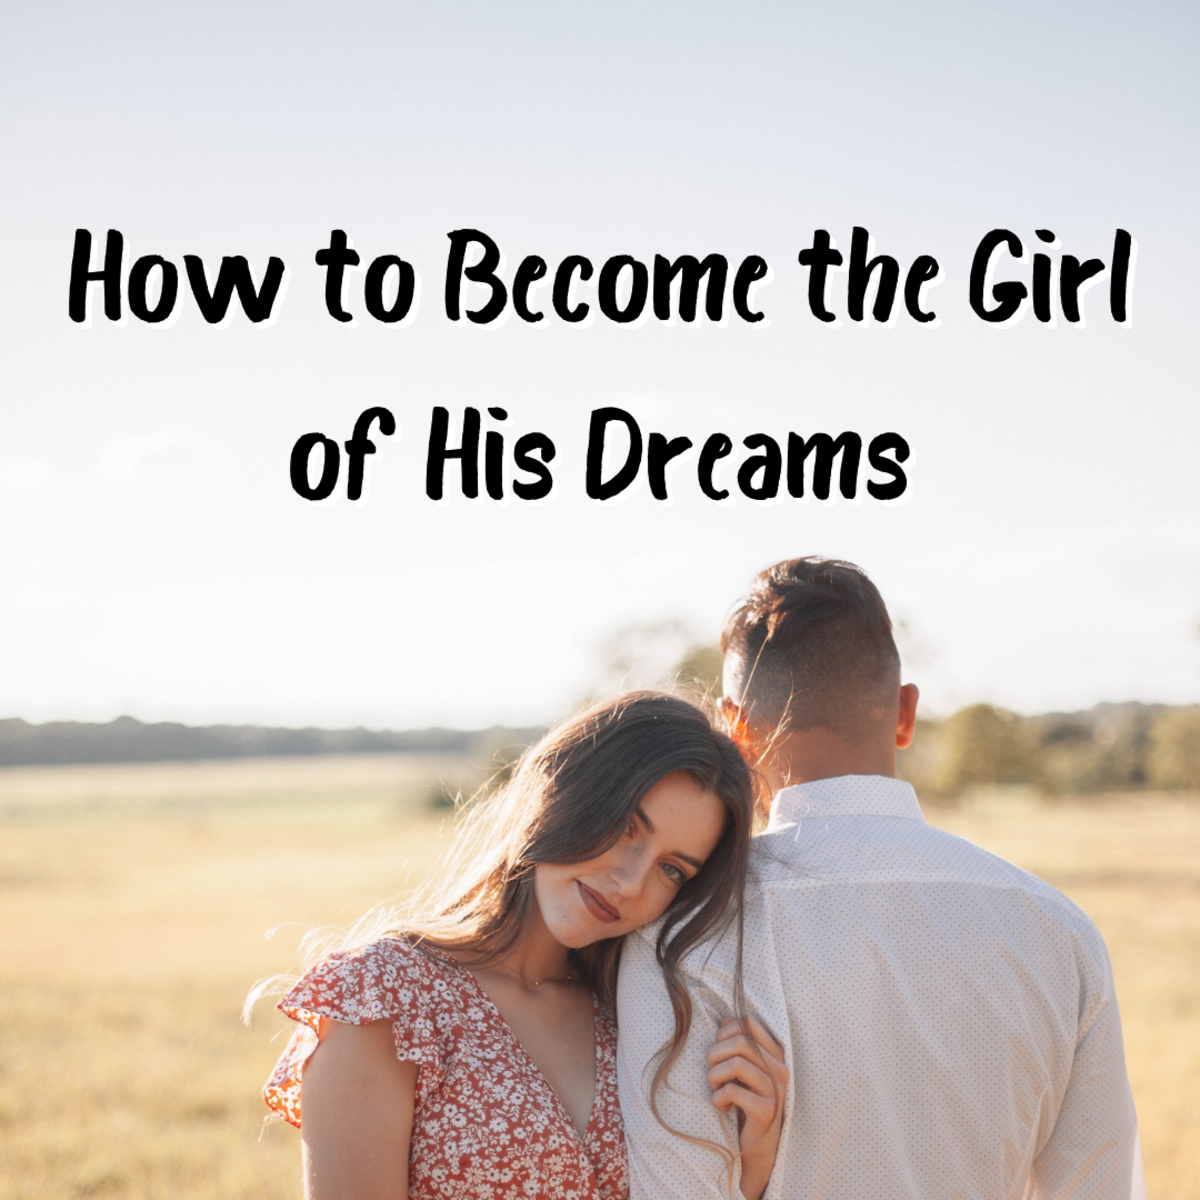 5 Ways to Become His Dream Girl